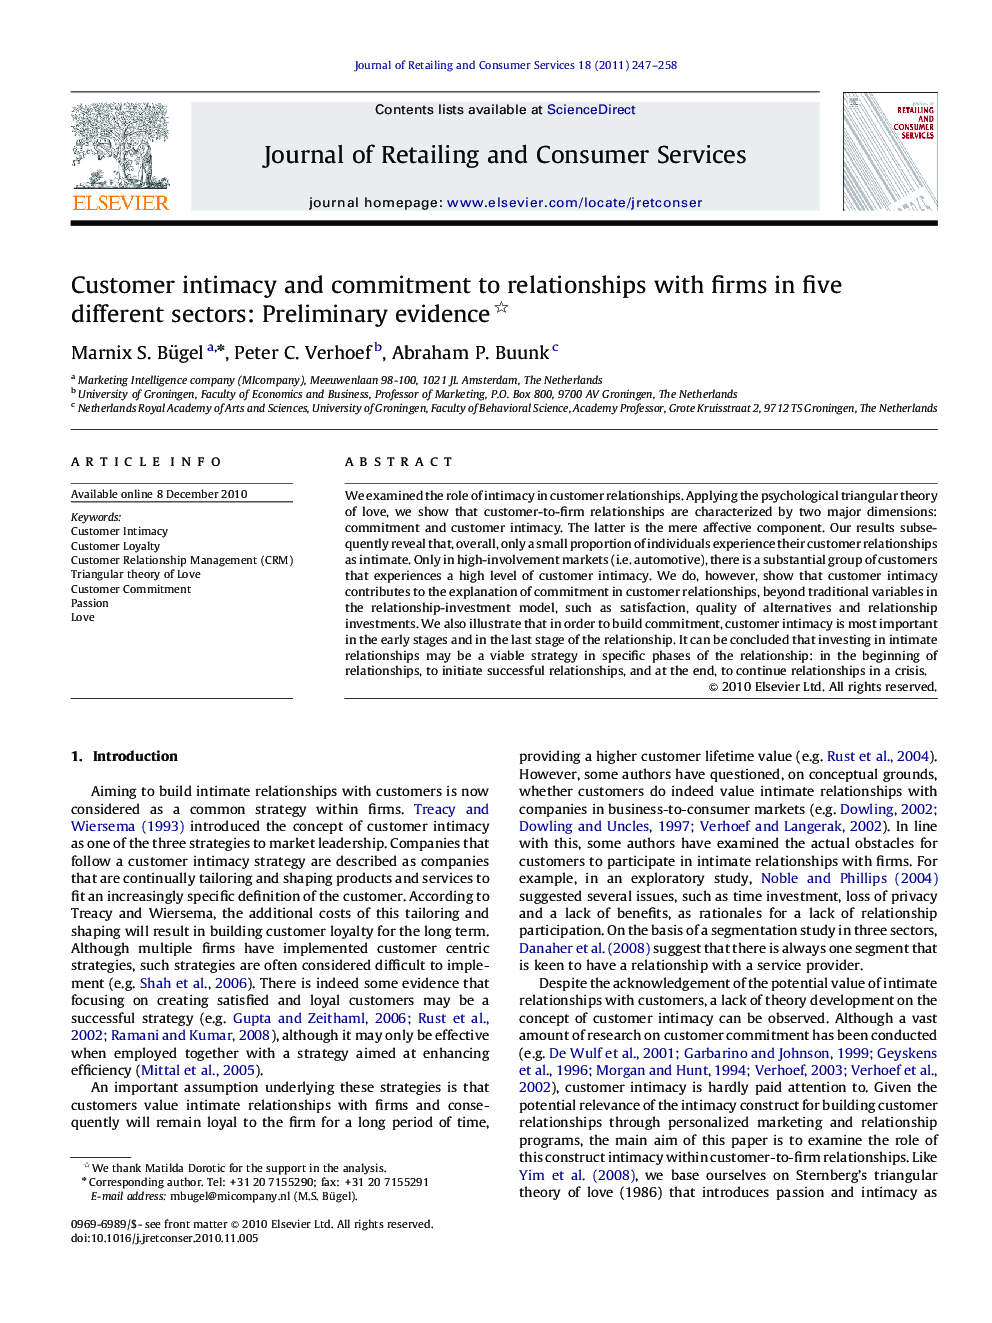 Customer intimacy and commitment to relationships with firms in five different sectors: Preliminary evidence 